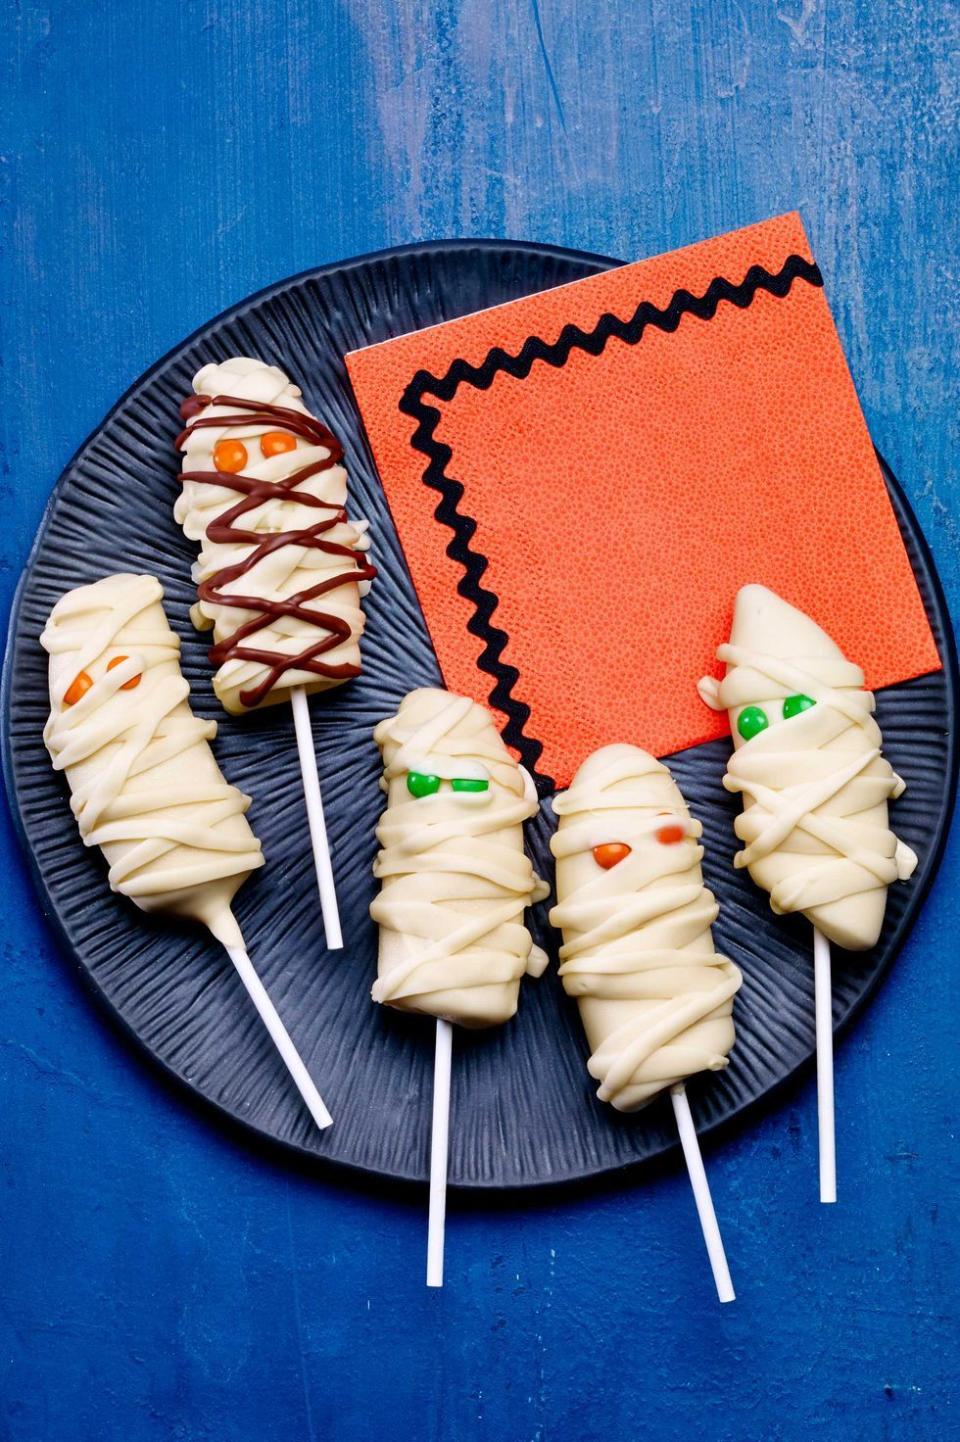 60 Easy Halloween Desserts That Are So Good You'll Be Scared